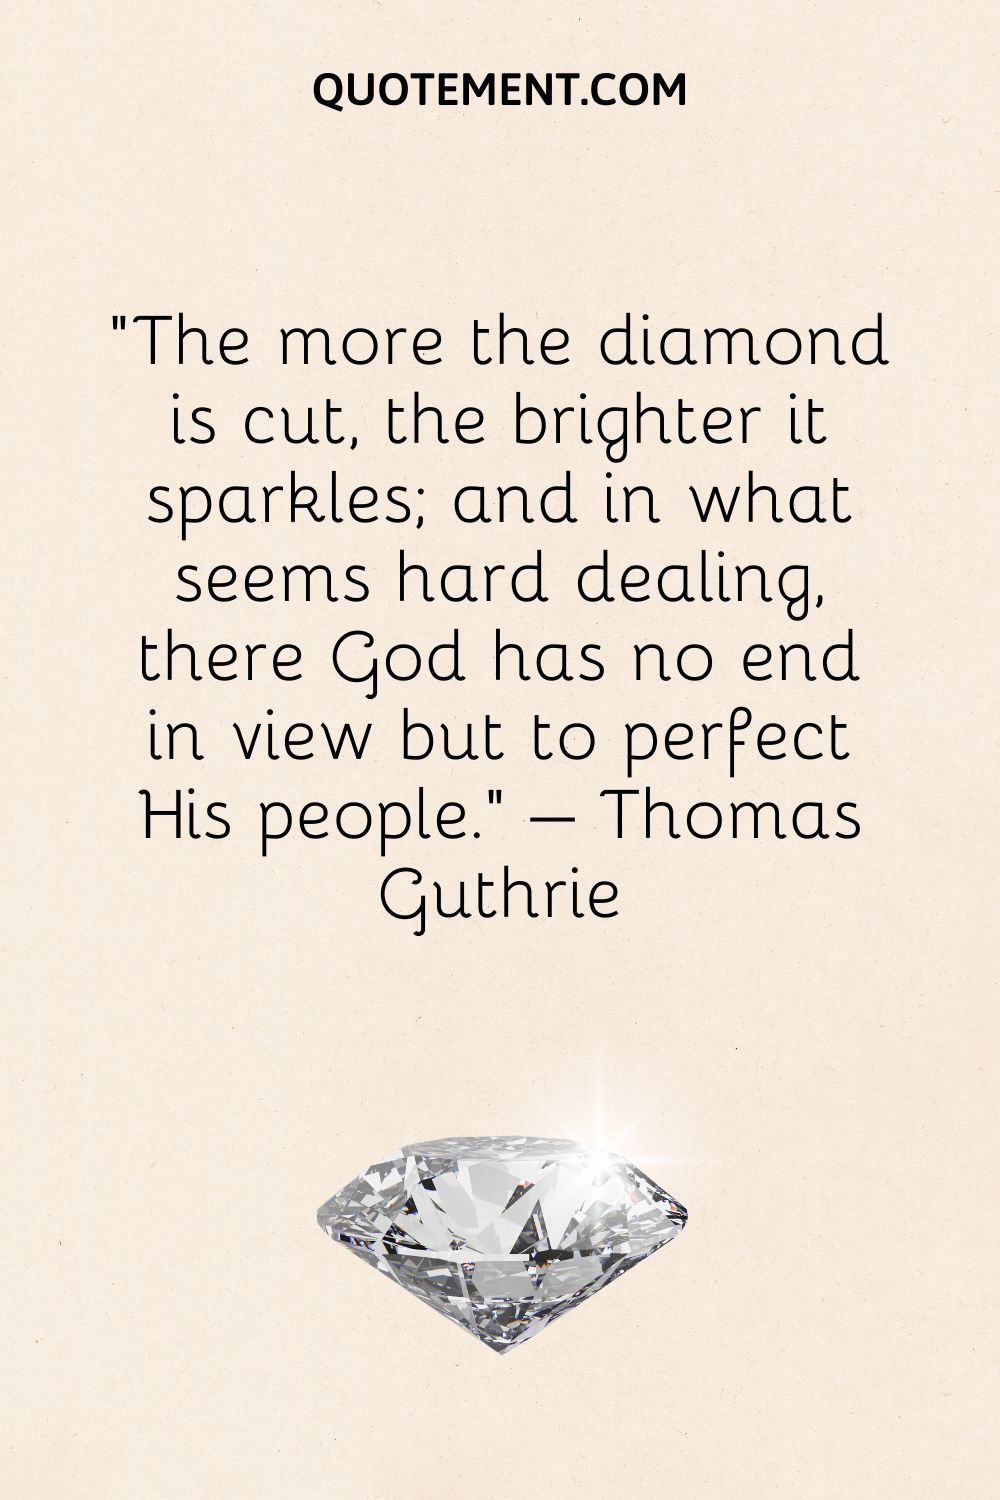 The more the diamond is cut, the brighter it sparkles